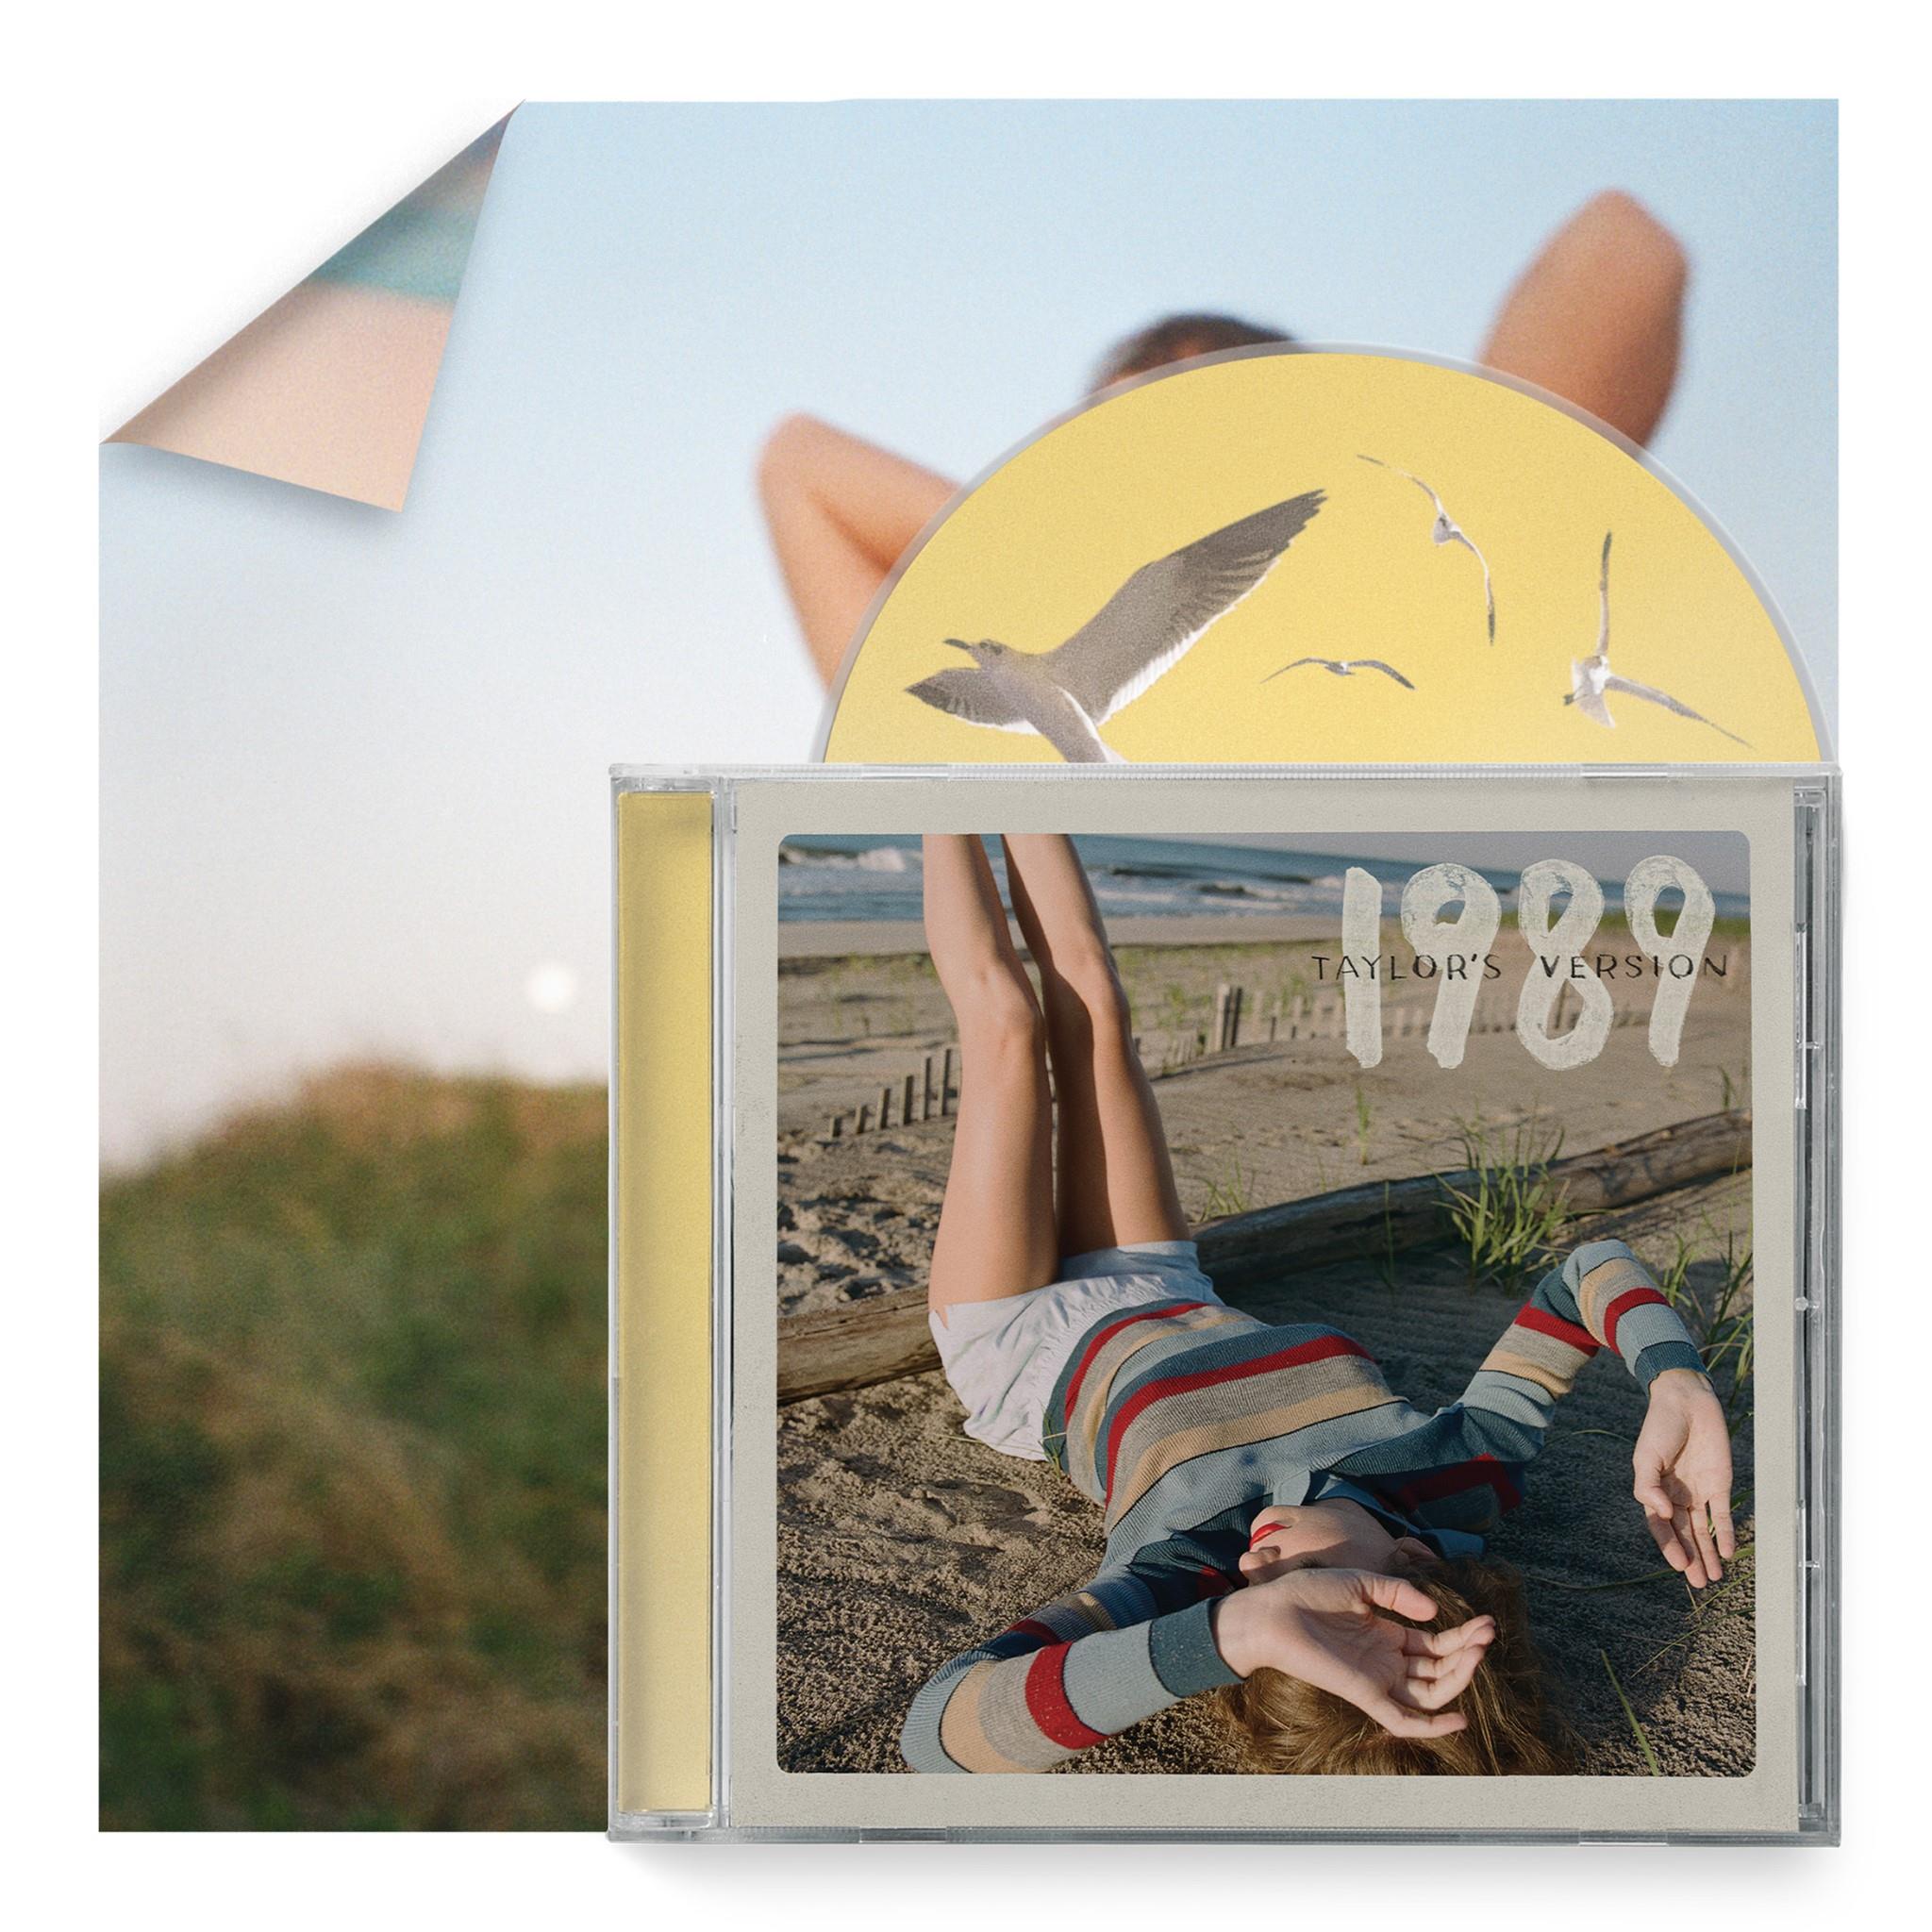 1989 (taylor's version) (jb hi-fi au exclusive sunrise boulevard yellow deluxe poster edition)